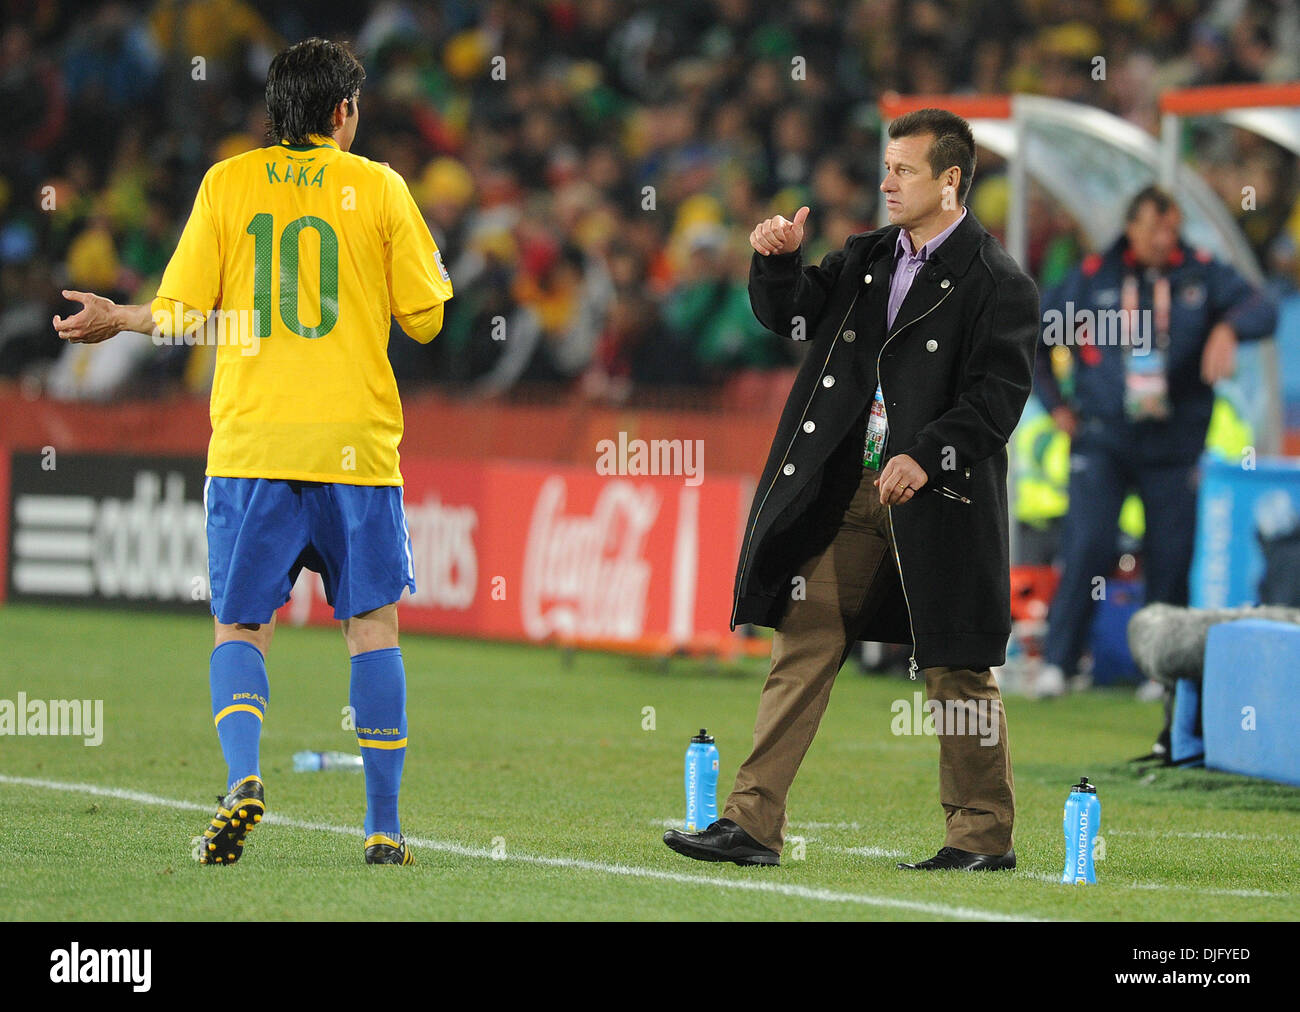 June 28, 2010 - Johannesburg, South Africa - Carlos Dunga, coach of Brazil gestures with Kaka during the 2010 FIFA World Cup soccer match between Brazil and Chile at Ellis Park Stadium on June 28, 2010 in Johannesburg, South Africa. (Credit Image: © Luca Ghidoni/ZUMApress.com) Stock Photo